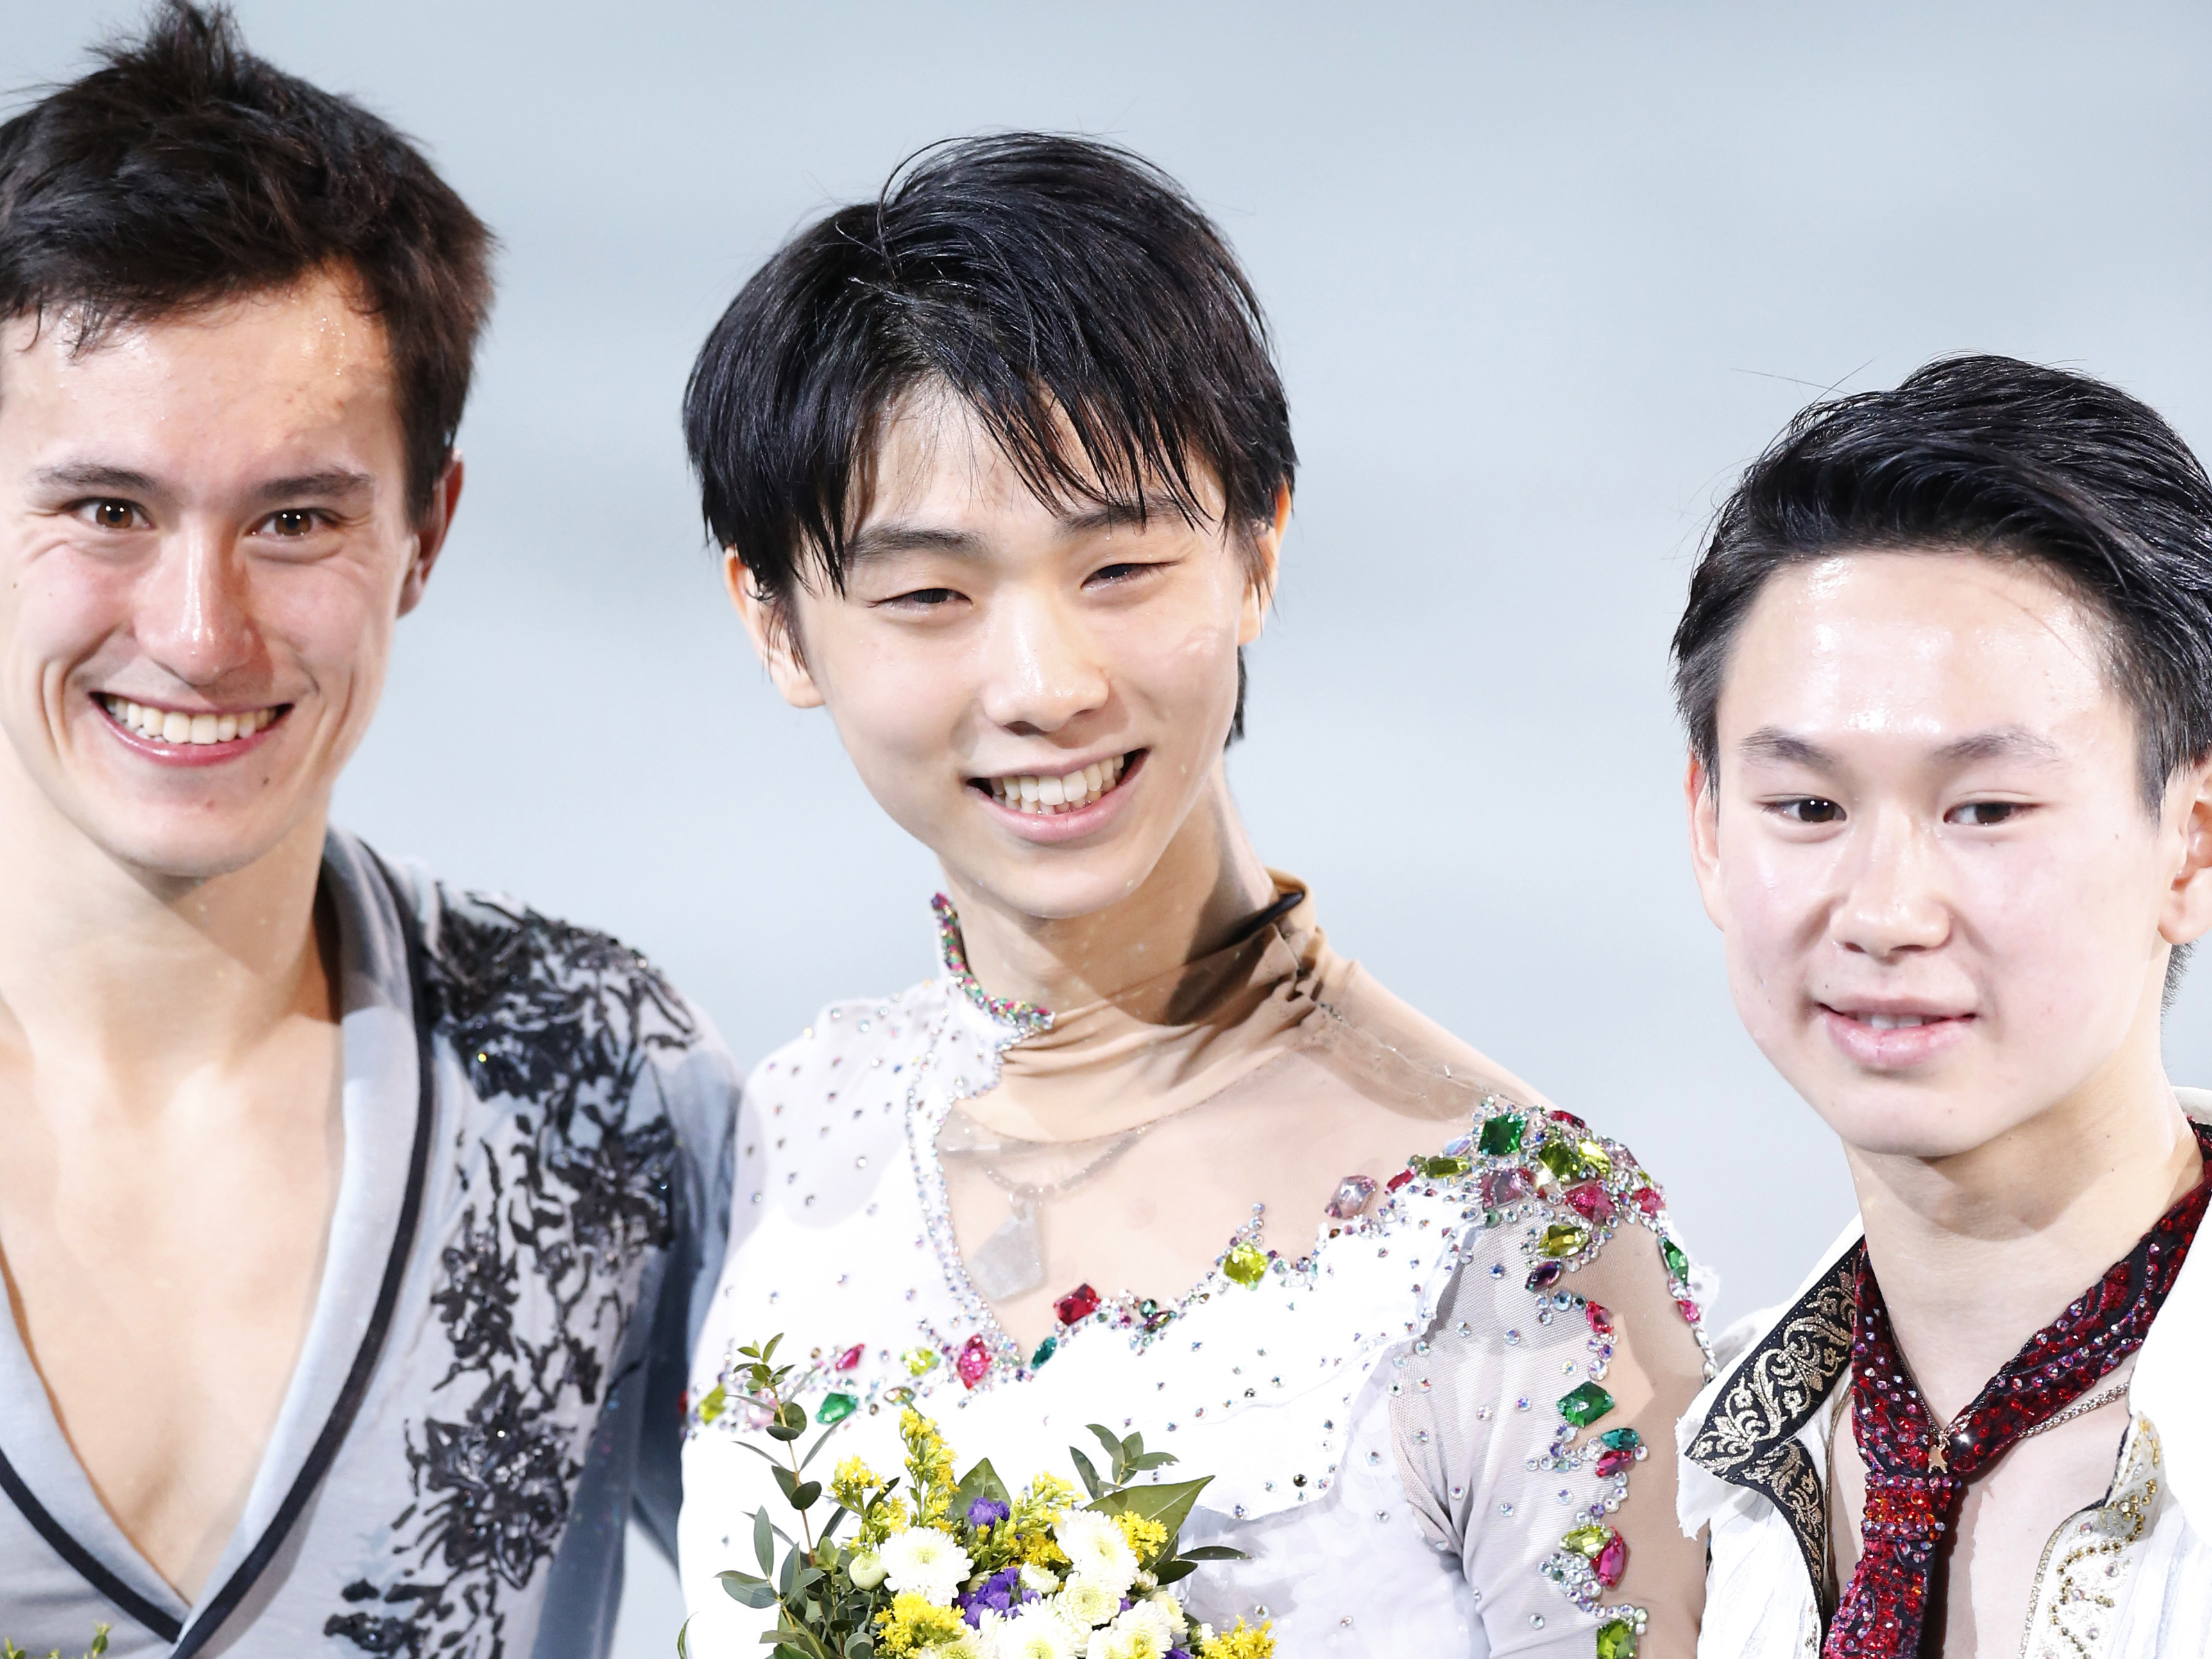 Yuzuru Hanyu goes to the next stage as a gold medalist after 2014.